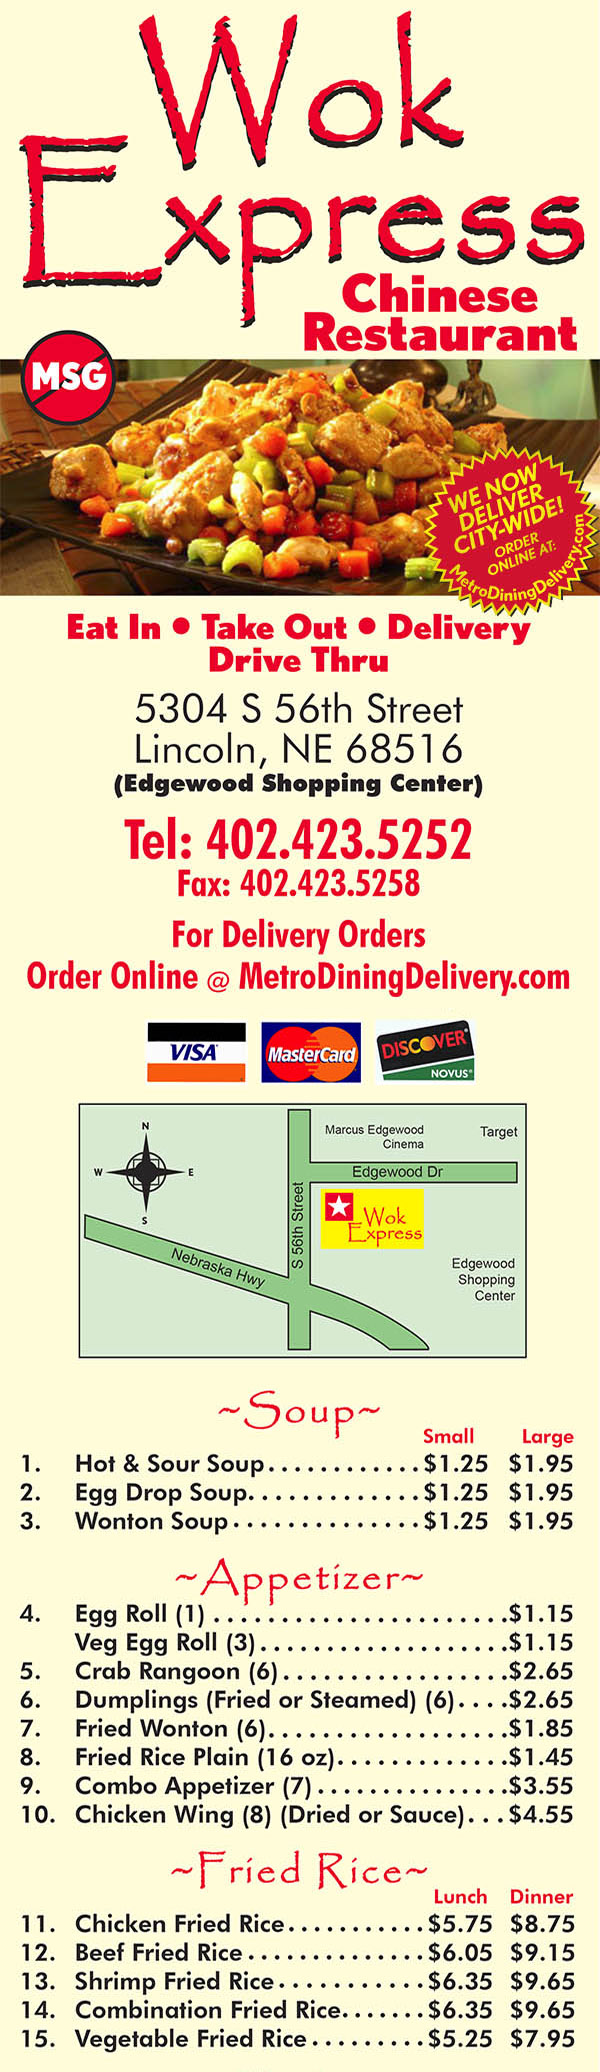 Wok Express Chinese Restaurant
Eat In • Take Out • Delivery
Drive Thru
5304 S 56th Street
Lincoln, NE 68516
(Edgewood Shopping Center)
Tel: 402.423.5252
Fax: 402.423.5258
For Delivery Orders Call: 
Metro Dining Delivery 402.474.7335
BUSINESS HOURS:
Sun-Thurs: 11:00am-9:30pm
Fri-Sat: 11:00am - 10:00pm
~Soup~
		Small		Large
1.	Hot & Sour Soup	$1.25	$1.95
2. 	Egg Drop Soup	$1.25	$1.95
3. 	Wonton Soup	$1.25	$1.95
~Appetizer~
4. 	Egg Roll (1) 			$1.15
	Veg Egg Roll (3)		 	$1.15 
5. 	Crab Rangoon (6) 		 	$2.65
6. 	Dumplings (Fried or Steamed) (6)  	$2.65
7. 	Fried Wonton (6) 		 	$1.85
8. 	Fried Rice Plain (16 oz)		 	$1.45
9. 	Combo Appetizer (7) 		 	$3.55
10. 	Chicken Wing (8) (Dried or Sauce)	$4.55
~Fried Rice~
		 Lunch	Dinner
11. 	Chicken Fried Rice	$5.75 	$8.75
12. 	Beef Fried Rice	$6.05 	$9.15
13. 	Shrimp Fried Rice	$6.35 	$9.65
14.	Combination Fried Rice	$6.35	$9.65
15.	Vegetable Fried Rice	$5.25	$7.95
~Chicken~
		Lunch	Dinner
16.	Sweet & Sour Chicken	$5.75	$8.75
17.	Sesame Chicken	$6.05	$9.15
18.	Peanut Butter Chicken	$6.05	$9.15
19.	Cashew Chicken	$5.75	$8.75
20.	Almond Chicken	$5.75	$8.75
21.	Moo Goo Gai Pan	$5.75	$8.75
22.	Broccoli Chicken	$5.75	$8.75
23.	Curry Chicken	$5.75	$8.75
24.	Snow Pea Chicken	$5.75	$8.75
25.	Vegetable Chjicken	$5.75	$8.75
26.	Hot Garlic Chicken	$5.75	$8.75
27.	Hunan Chicken	$5.75	$8.75
28.	Kung Pao Chicken	$5.75	$8.75
29.	Szechuan Chicken	$5.75	$8.75
~Pork~
		 Lunch	Dinner
30.	Sweet & Sour Pork	$5.75	$8.75
31. 	Mongolian Pork	$5.85	$8.95
32.	Szechuan Pork	$5.75	$8.75
33.	Hunan Pork	$5.75	$8.75
~Beef~
		 Lunch	Dinner
34.	Broccoli Beef	$6.05	$9.15
35.	Pepper Beef	$6.05	$9.15
36.	Mongolian Beef	$6.15	$9.35
37.	Snow Pea Beef	$6.05	$9.15
38.	Vegetable Beef	$6.05	$9.15
39.	Hunan Beef	$6.05	$9.15
40.	Hot Garlic Beef	$6.05	$9.15
41.	Kung Pao Beef	$6.05	$9.15
42.	Szechuan Beef	$6.05	$9.15
~Shrimp~
		 Lunch	Dinner
43.	Broccoli Shrimp	$6.35	$9.65
44.	Cashew Shrimp	$6.35	$9.65
45.	Almond Shrimp	$6.35	$9.65
46.	Snow Pea Beef	$6.35	$9.65
47.	Vegetable Shrimp	$6.35	$9.65
48.	Sweet & Sour Shrimp	$6.35	$9.65
49.	Hunan Shrimp	$6.35	$9.65
50.	Hot Garlic Shrimp	$6.35	$9.65
51.	Kung Pao Shrimp	$6.35	$9.65
52.	Szechuan Shrimp	$6.35	$9.65
~Vegetarian~
		 Lunch	Dinner
53.	Vegetable Delight	$5.25	$7.95
54.	Broccoli w/Garlic Sauce	$5.25	$7.95
55.	Steam Mixed Vegetables	$5.25	$7.95
~Lo Mein or Chow Mein~
(Soft Noodles or Crispy Noodles)
		 Lunch	Dinner
56.	Chicken 	$5.75	$8.75
57.	Beef	$6.05	$9.15
58.	Shrimp	$6.35	$9.65
59.	Combination	$6.35	$9.65
60.	Vegetable	$5.25	$7.95
~Chef Special~
		Lunch	Dinner
61.	Gen Tso Chicken	$6.05	$9.75
62.	Happy Family	$6.35	$9.75
63.	Shrimp with Lobster Sauce	$6.35	$9.75
64.	Tofu Assortment 
	with Beef, Shrimp, Chicken	$6.35	$9.75
65.	Hot Braised Chicken	$6.05	$9.15
Hot & Spicy
~Combo Special~ 
(Only with Entree) ($1.35 Extra)
Served with egg roll and breaded chicken 

~Dinner Special~
Includes 2 Crab Rangoon OR Egg roll & fried rice 
(except Lo Mein) NOT AVAILABLE FOR DELIVERY

~Beverages~
Ice Tea, Lemonade, Pepsi, Diet Pepsi, 
Mt Dew, Sierra Mist
Small $1.45 Medium $1.65 Large $1.85 
Hot Tea $1.05

All orders served with Steamed of Fried Rice
Lunch = Small Portion
Dinner = Large Portion

Gift Certificates Available

Get Wok Express delivery! Order online with Metro Dining Delivery and get great Chinese food from Wok Express delivered to your home or office FAST.
